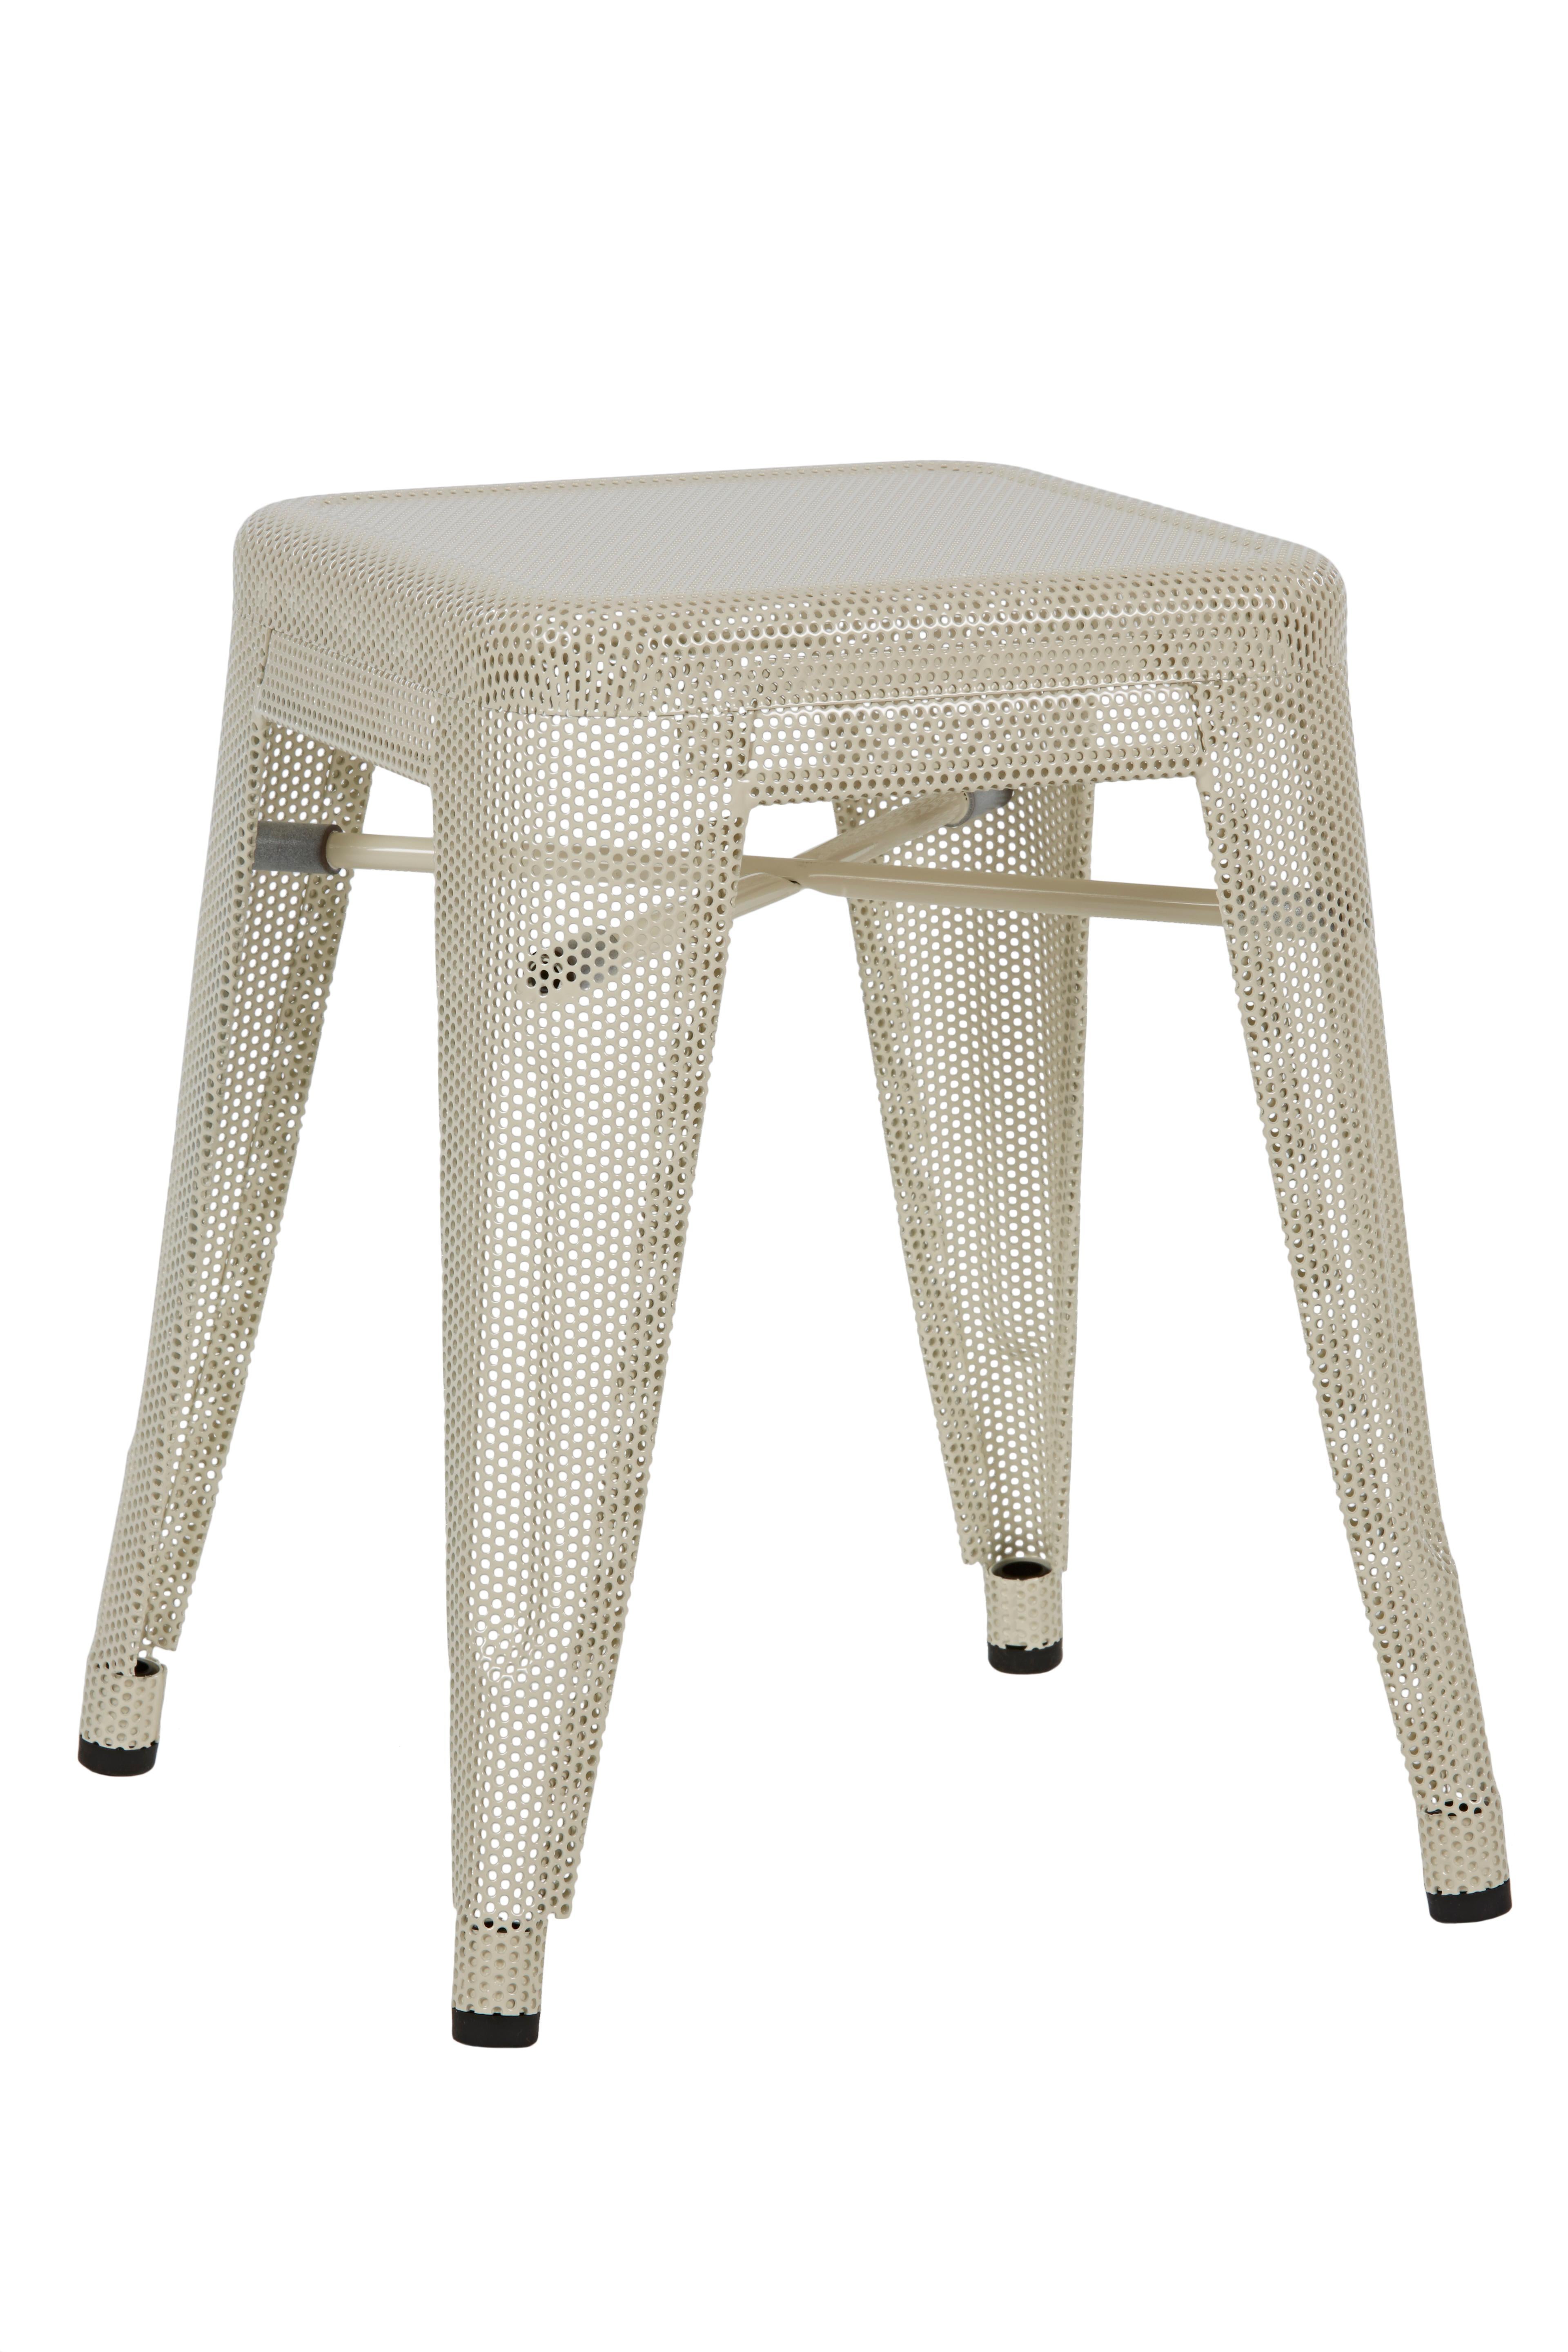 For Sale: White (Ivoire) H Stool 45 Perforated in Essential Colors by Chantal Andriot and Tolix 2